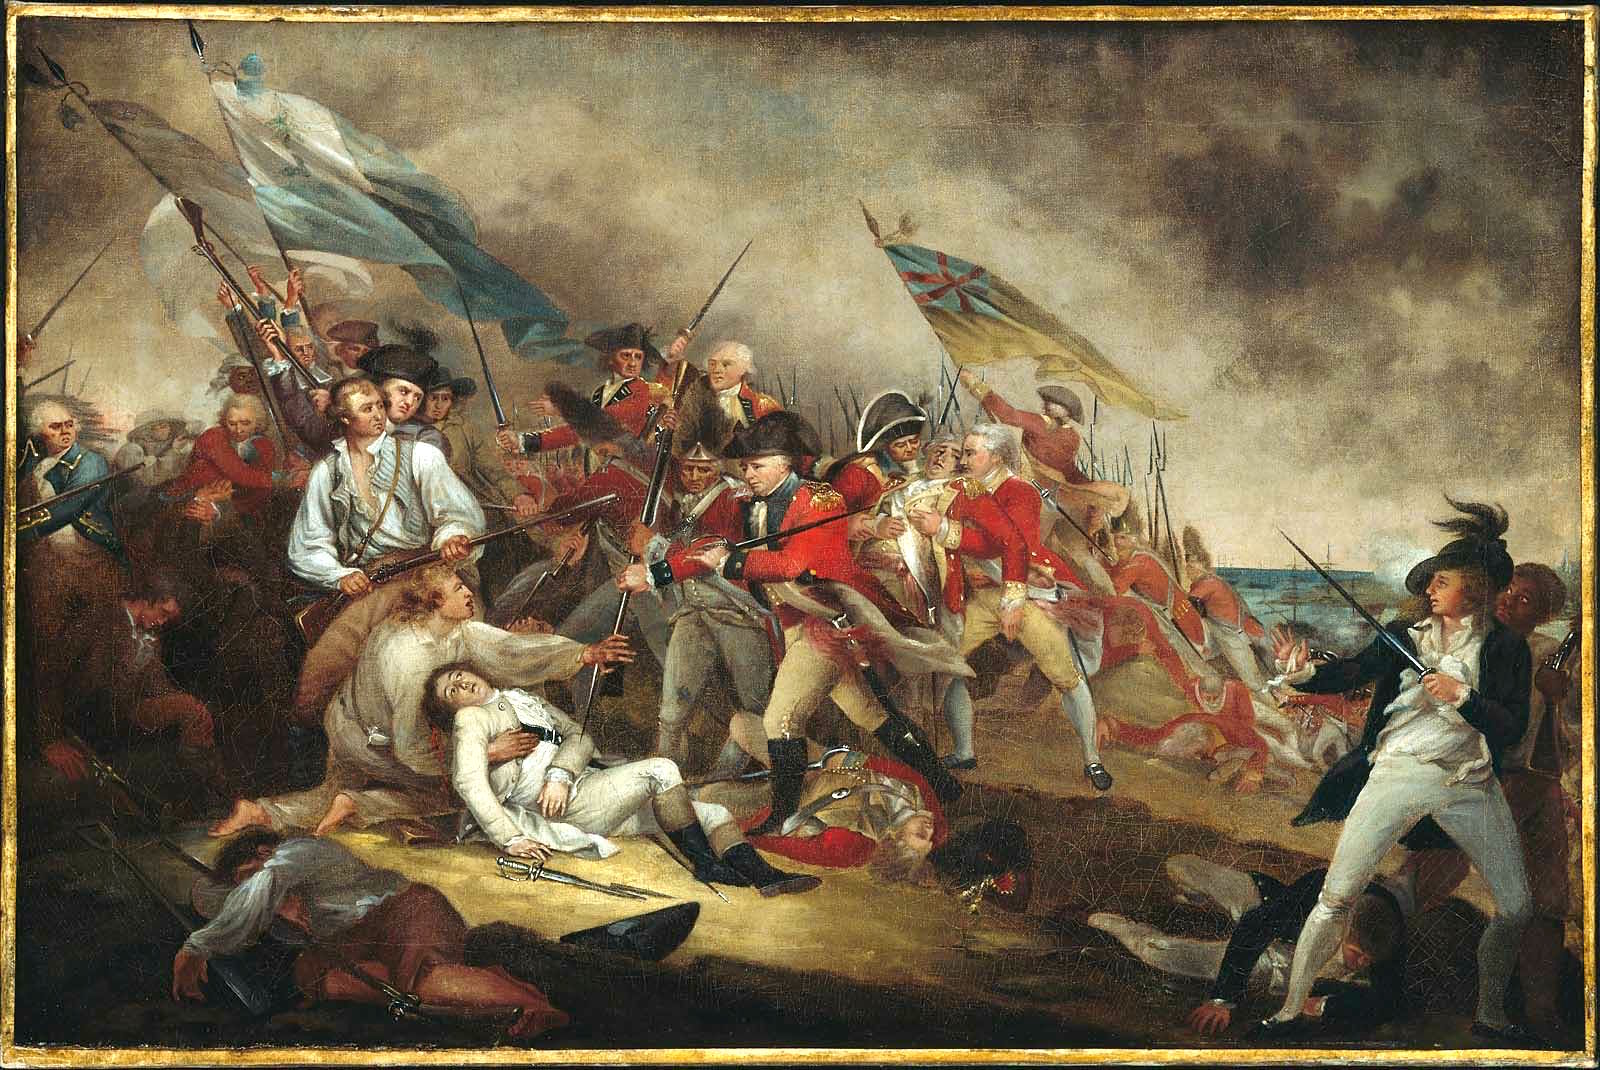 John Trumbull's painting The Death of John Trumbull at the Battle of Bunker's Hill